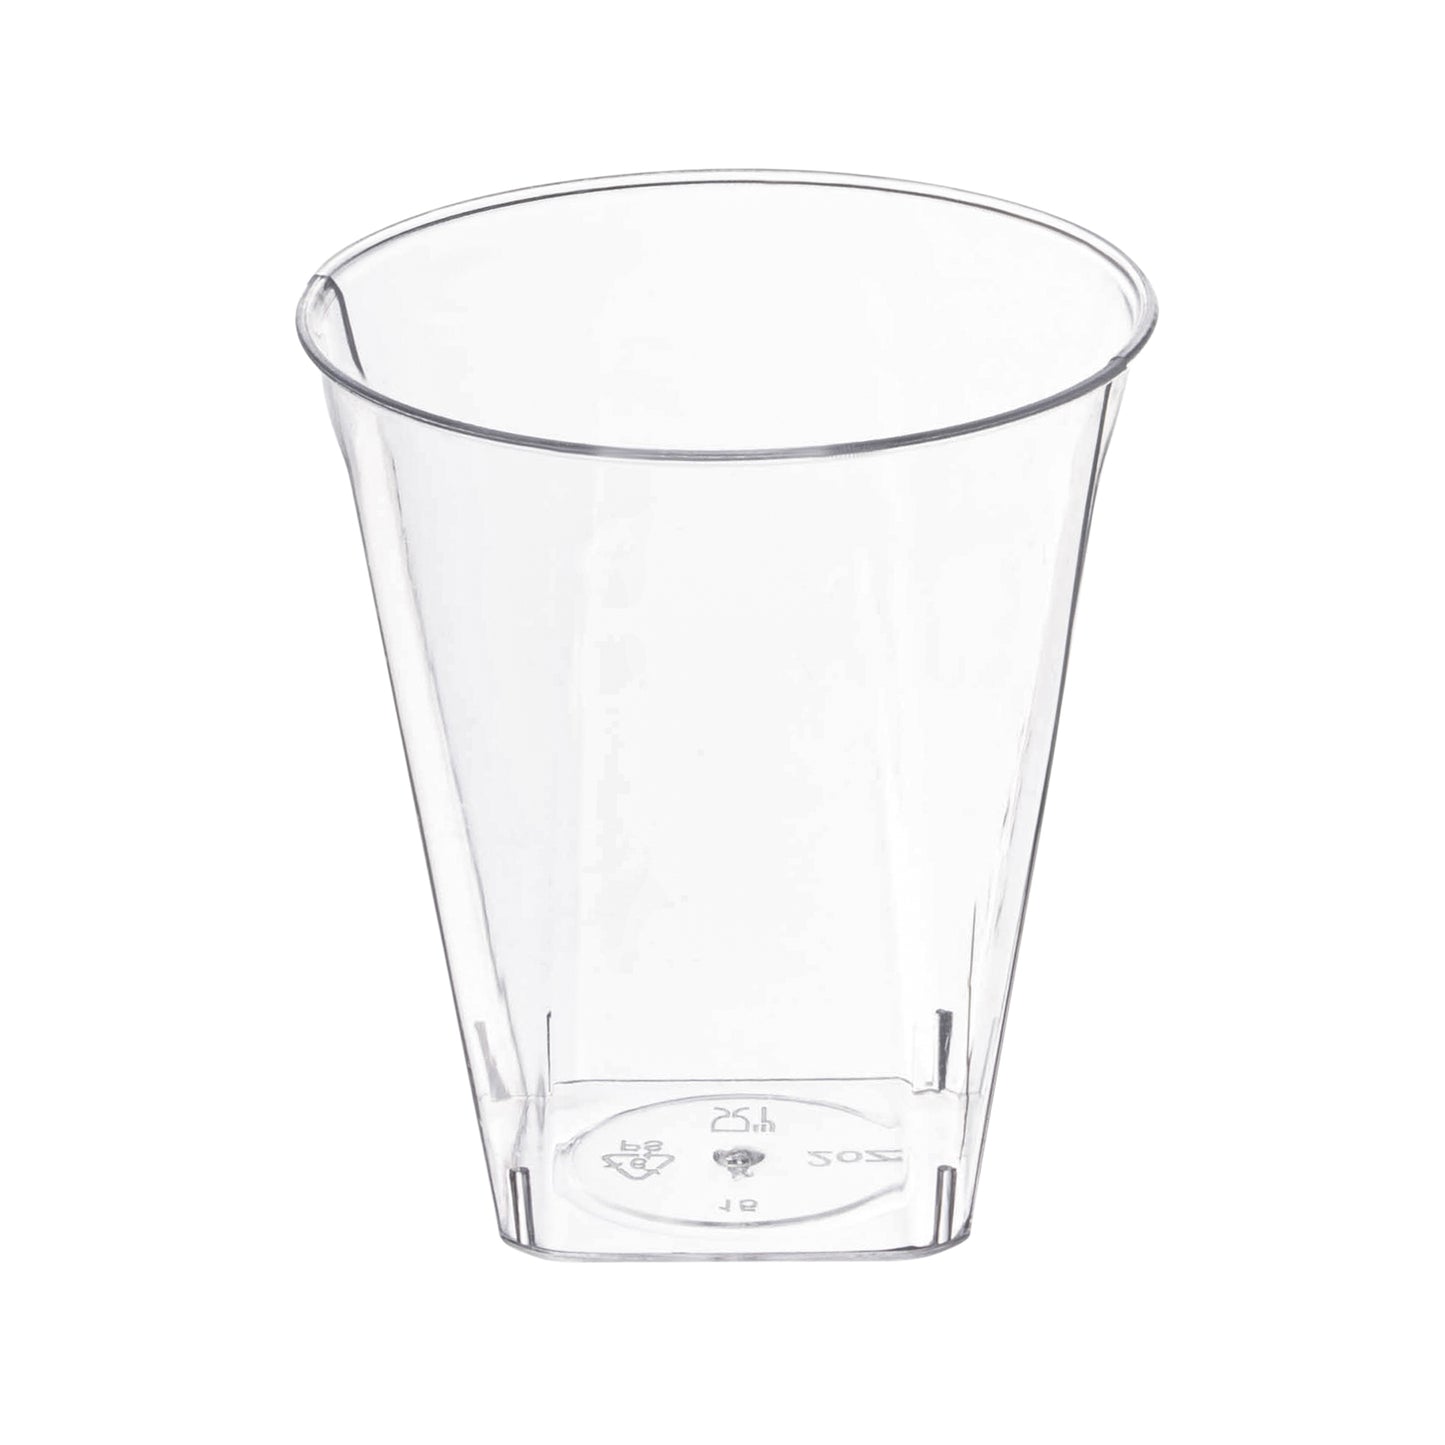 2 oz. Clear Square Bottom Plastic Disposable Shot Cups